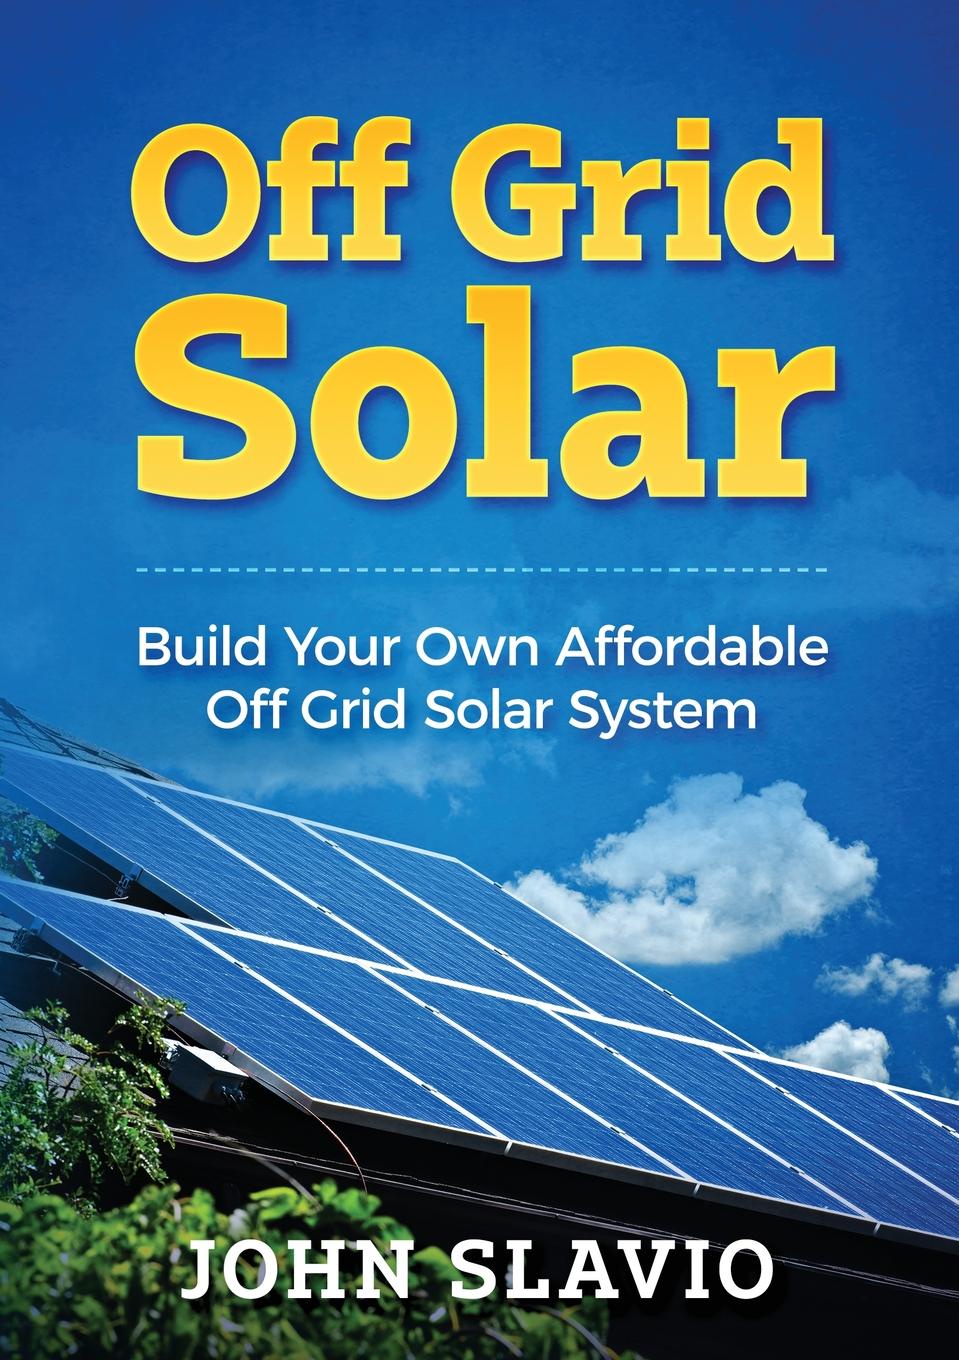 Off Grid Solar. Build Your Own Affordable Off Grid Solar System